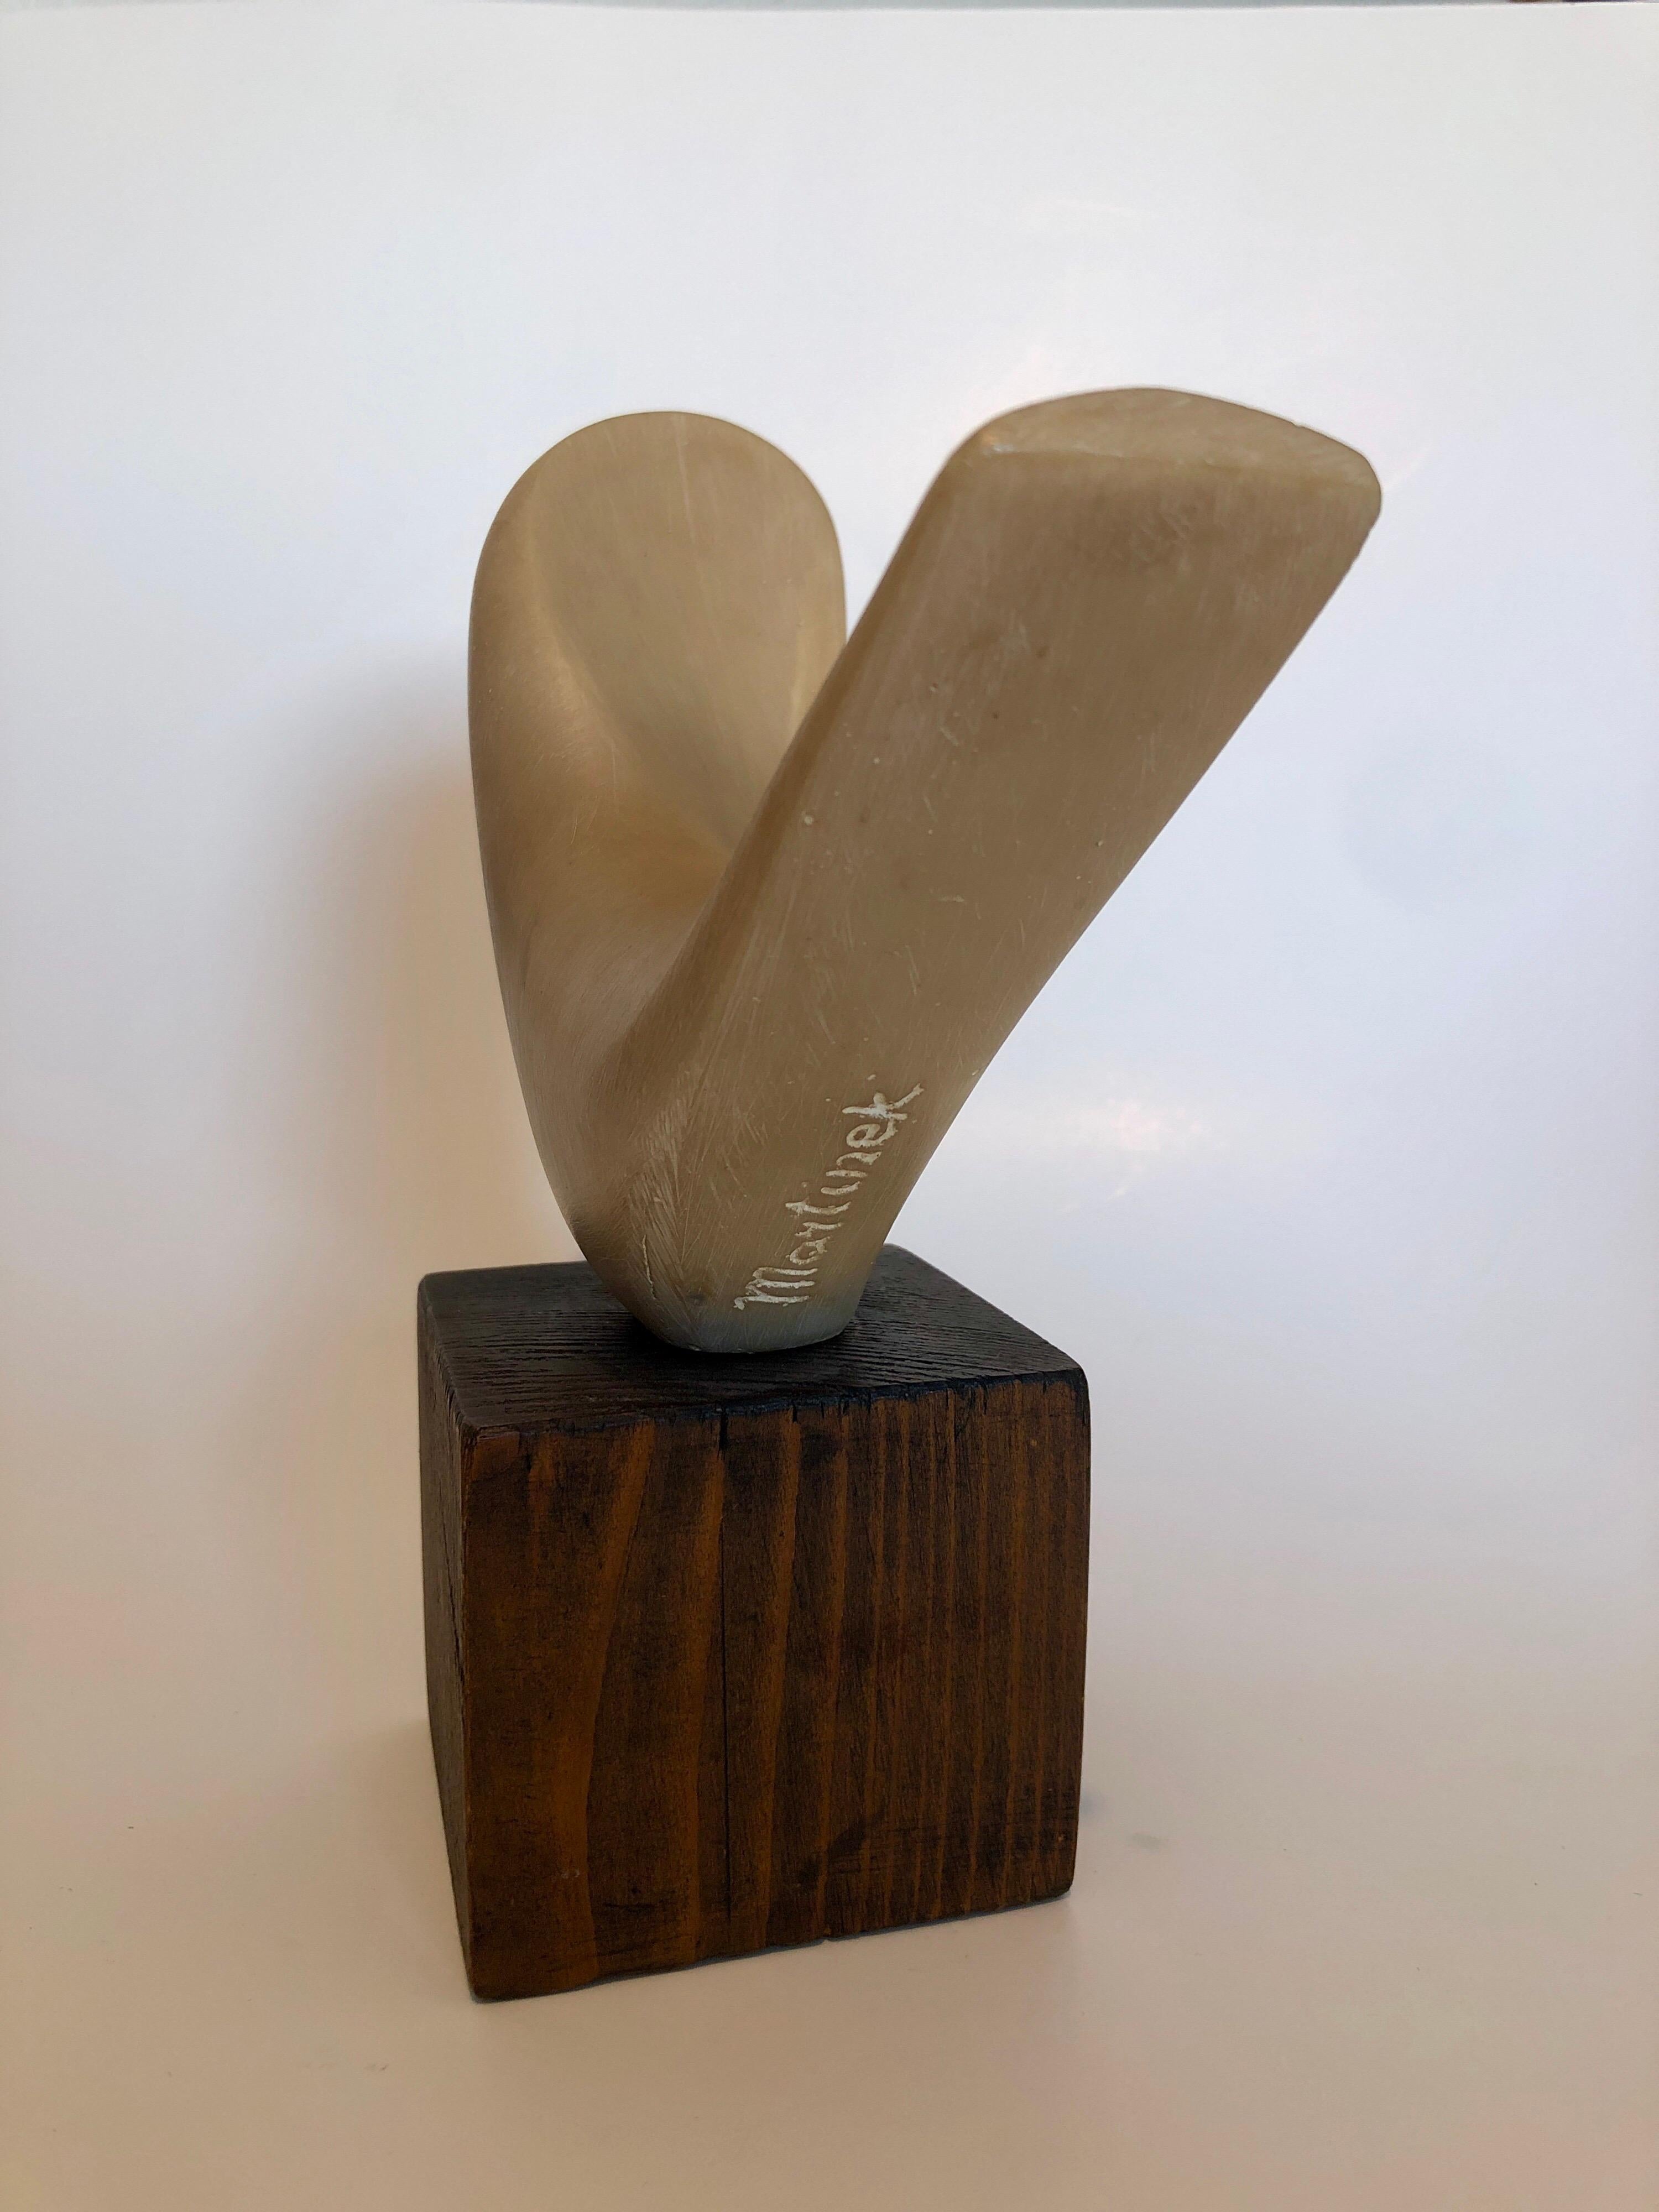 American sculptor Joseph Martinek was born in Chicago in 1915. He was a second generation apprentice to Auguste Rodin. He studied sculpture at the State Industrial School of Art, Prague, Czechoslovakia, 1934-39. 
This abstracted form conceived by